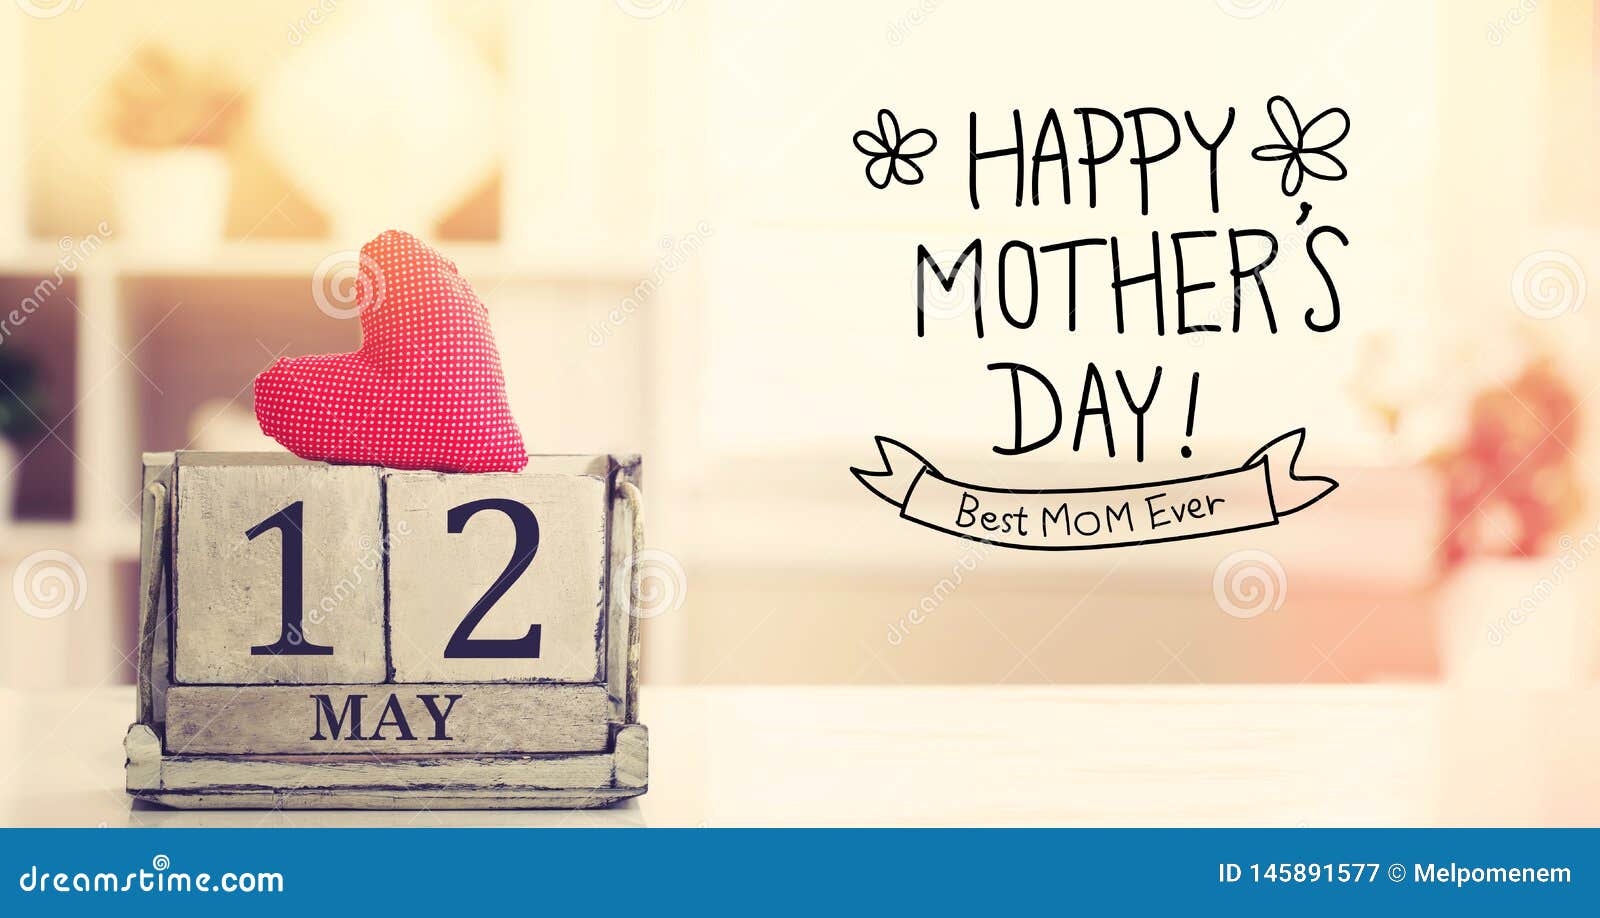 12 May Happy Mothers Day Message With Calendar Stock Image Image of